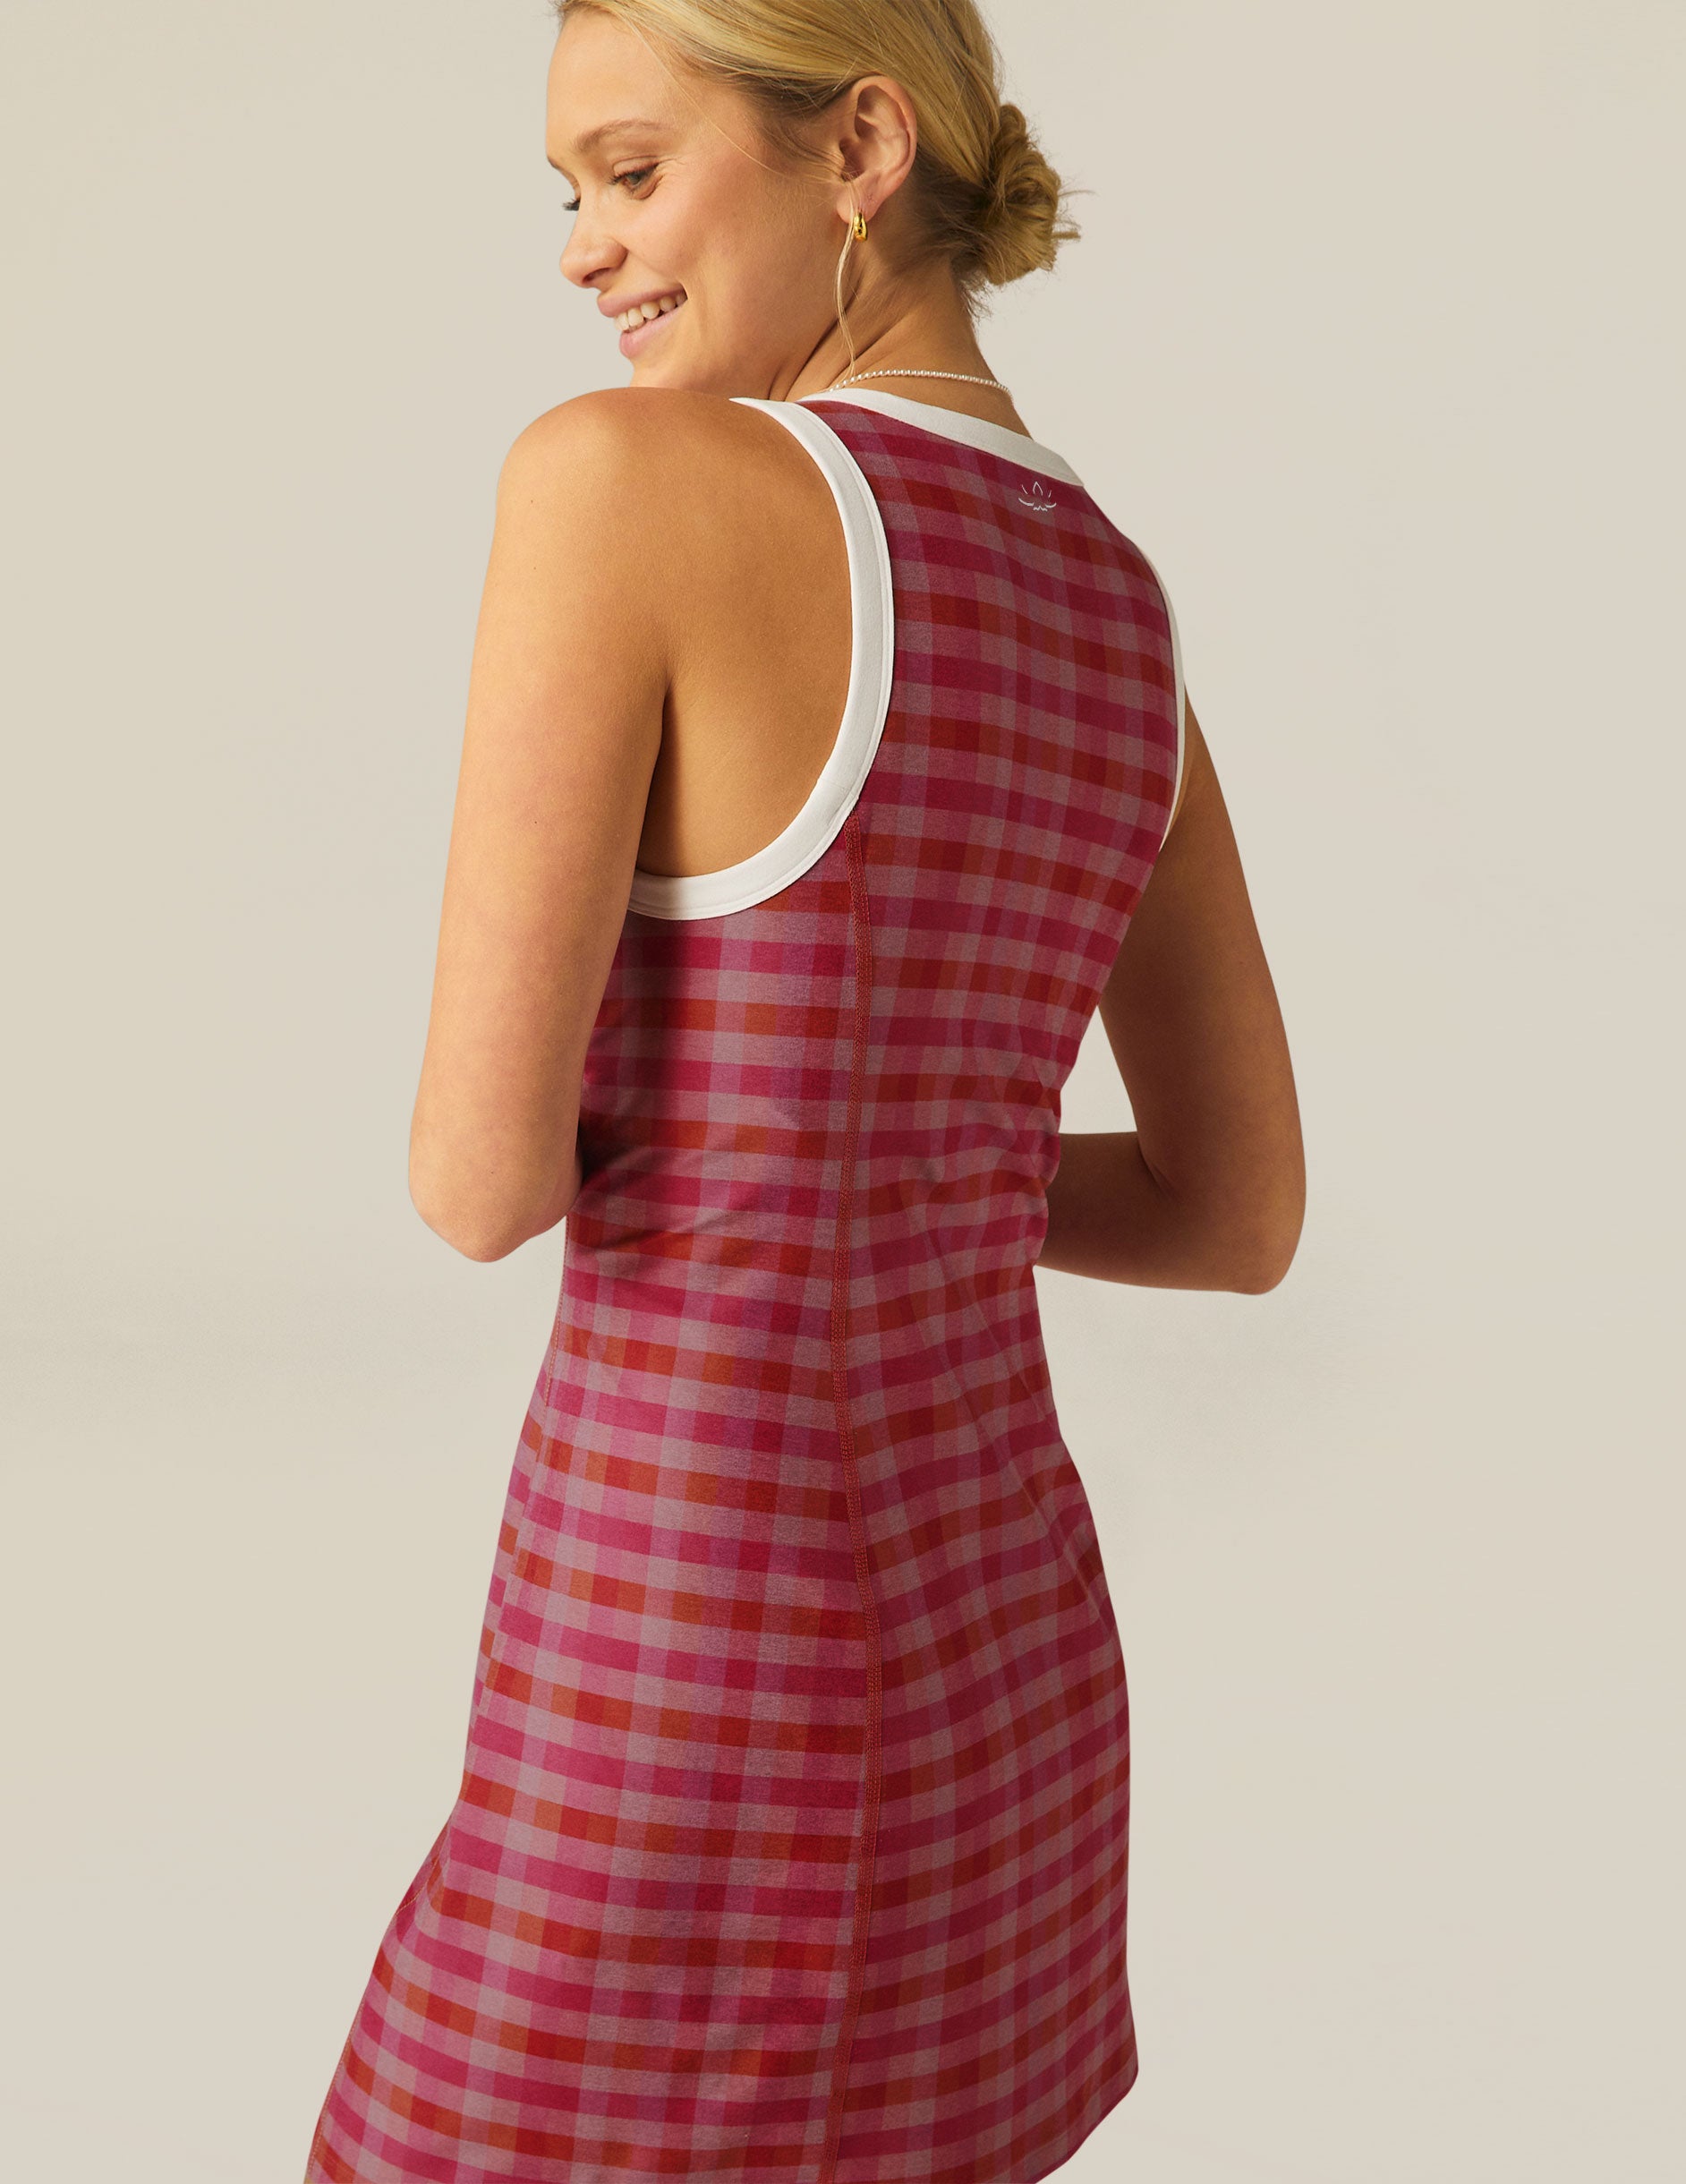 pink gingham printed mini dress with white outlining on arm holes and neckline. 